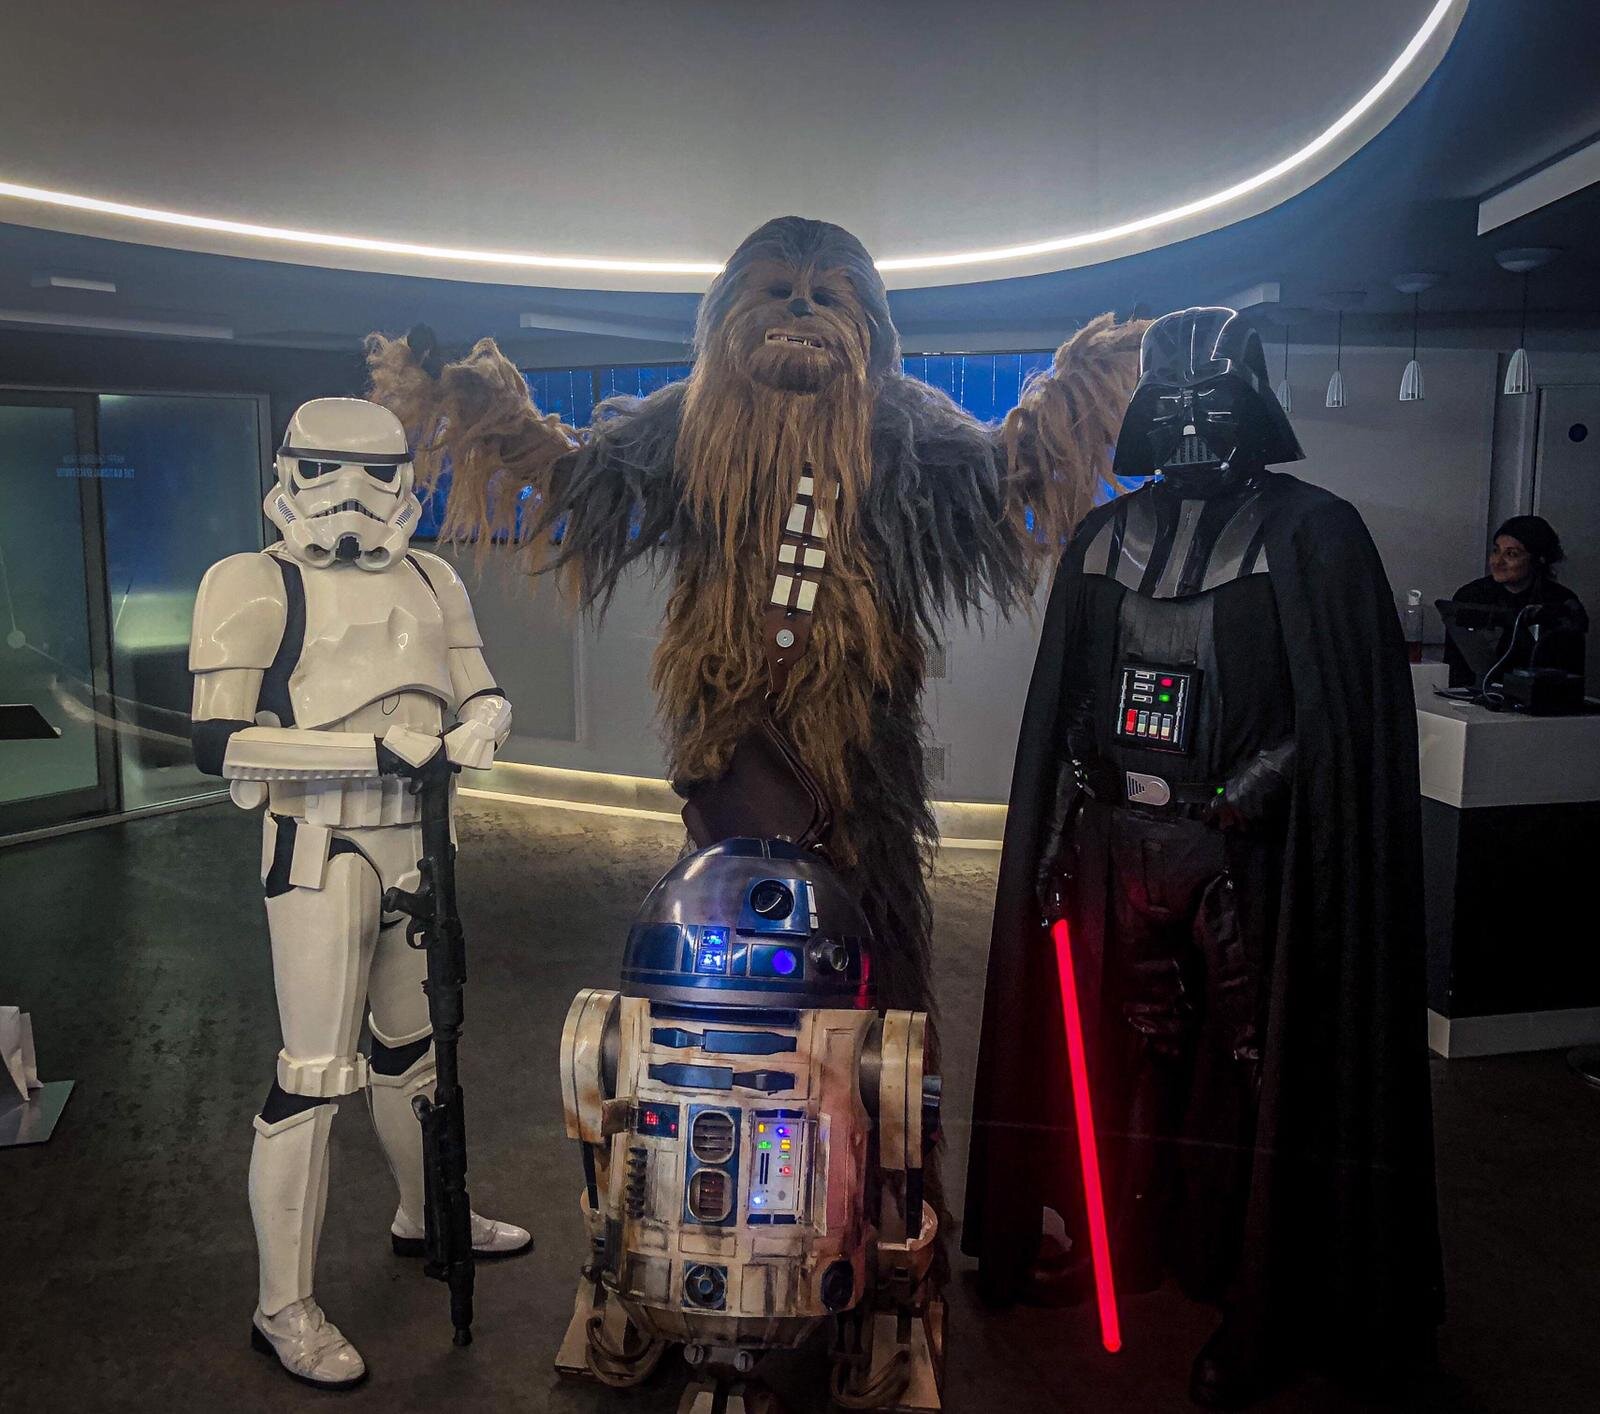 Star Wars characters at event